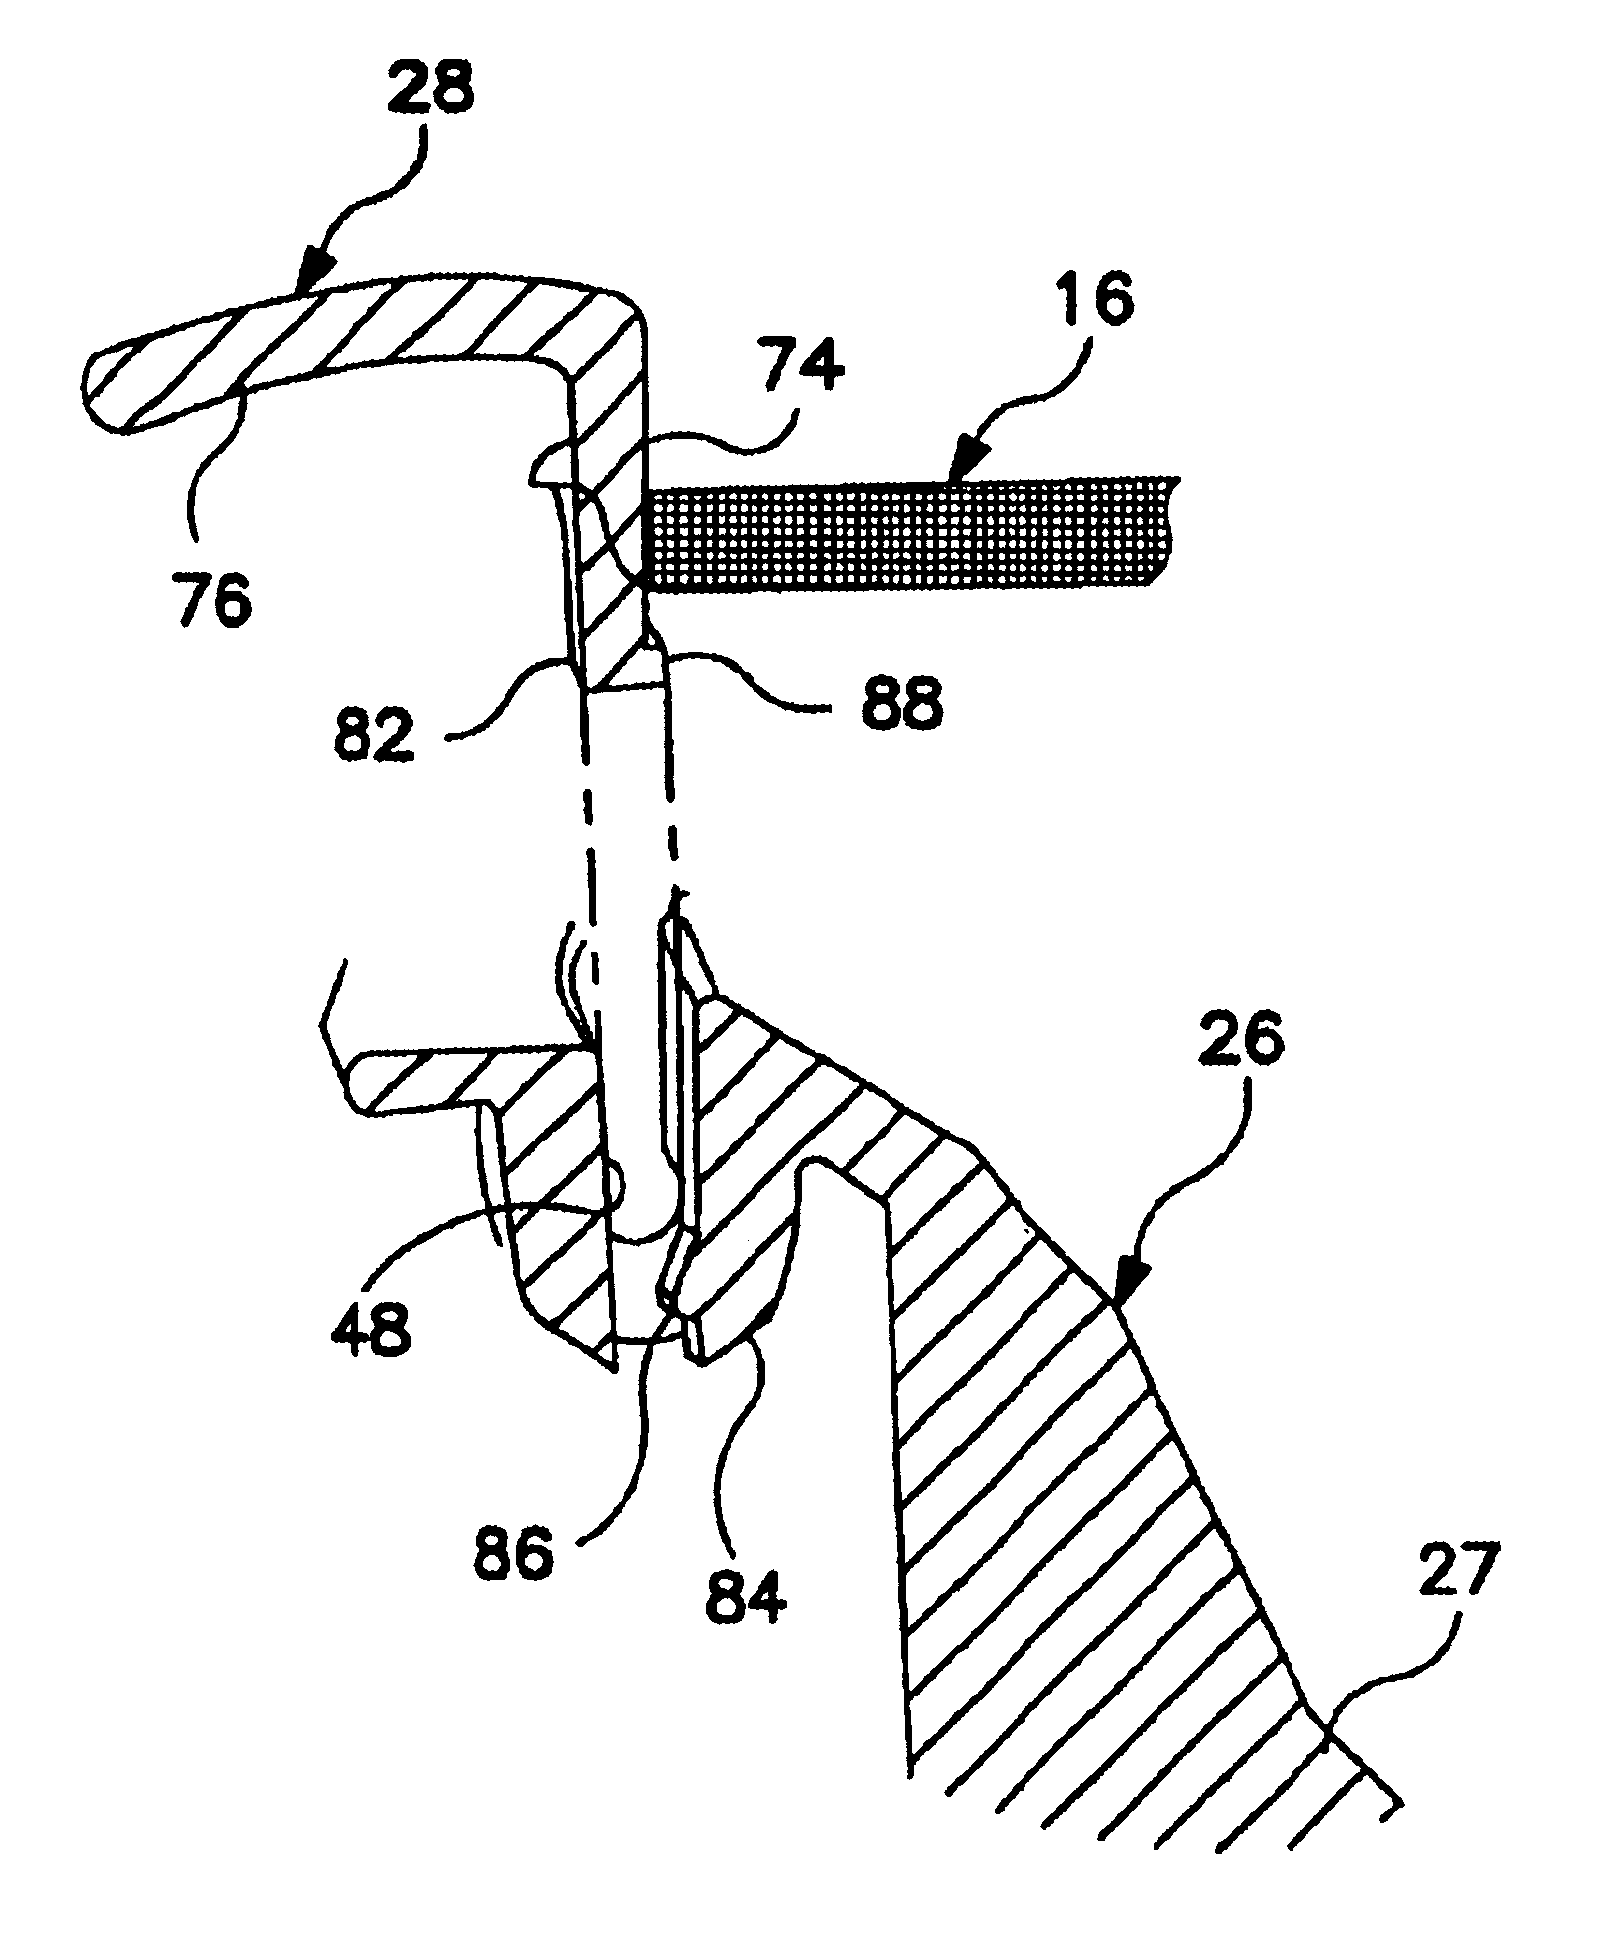 Load bearing fabric attachment and associated method